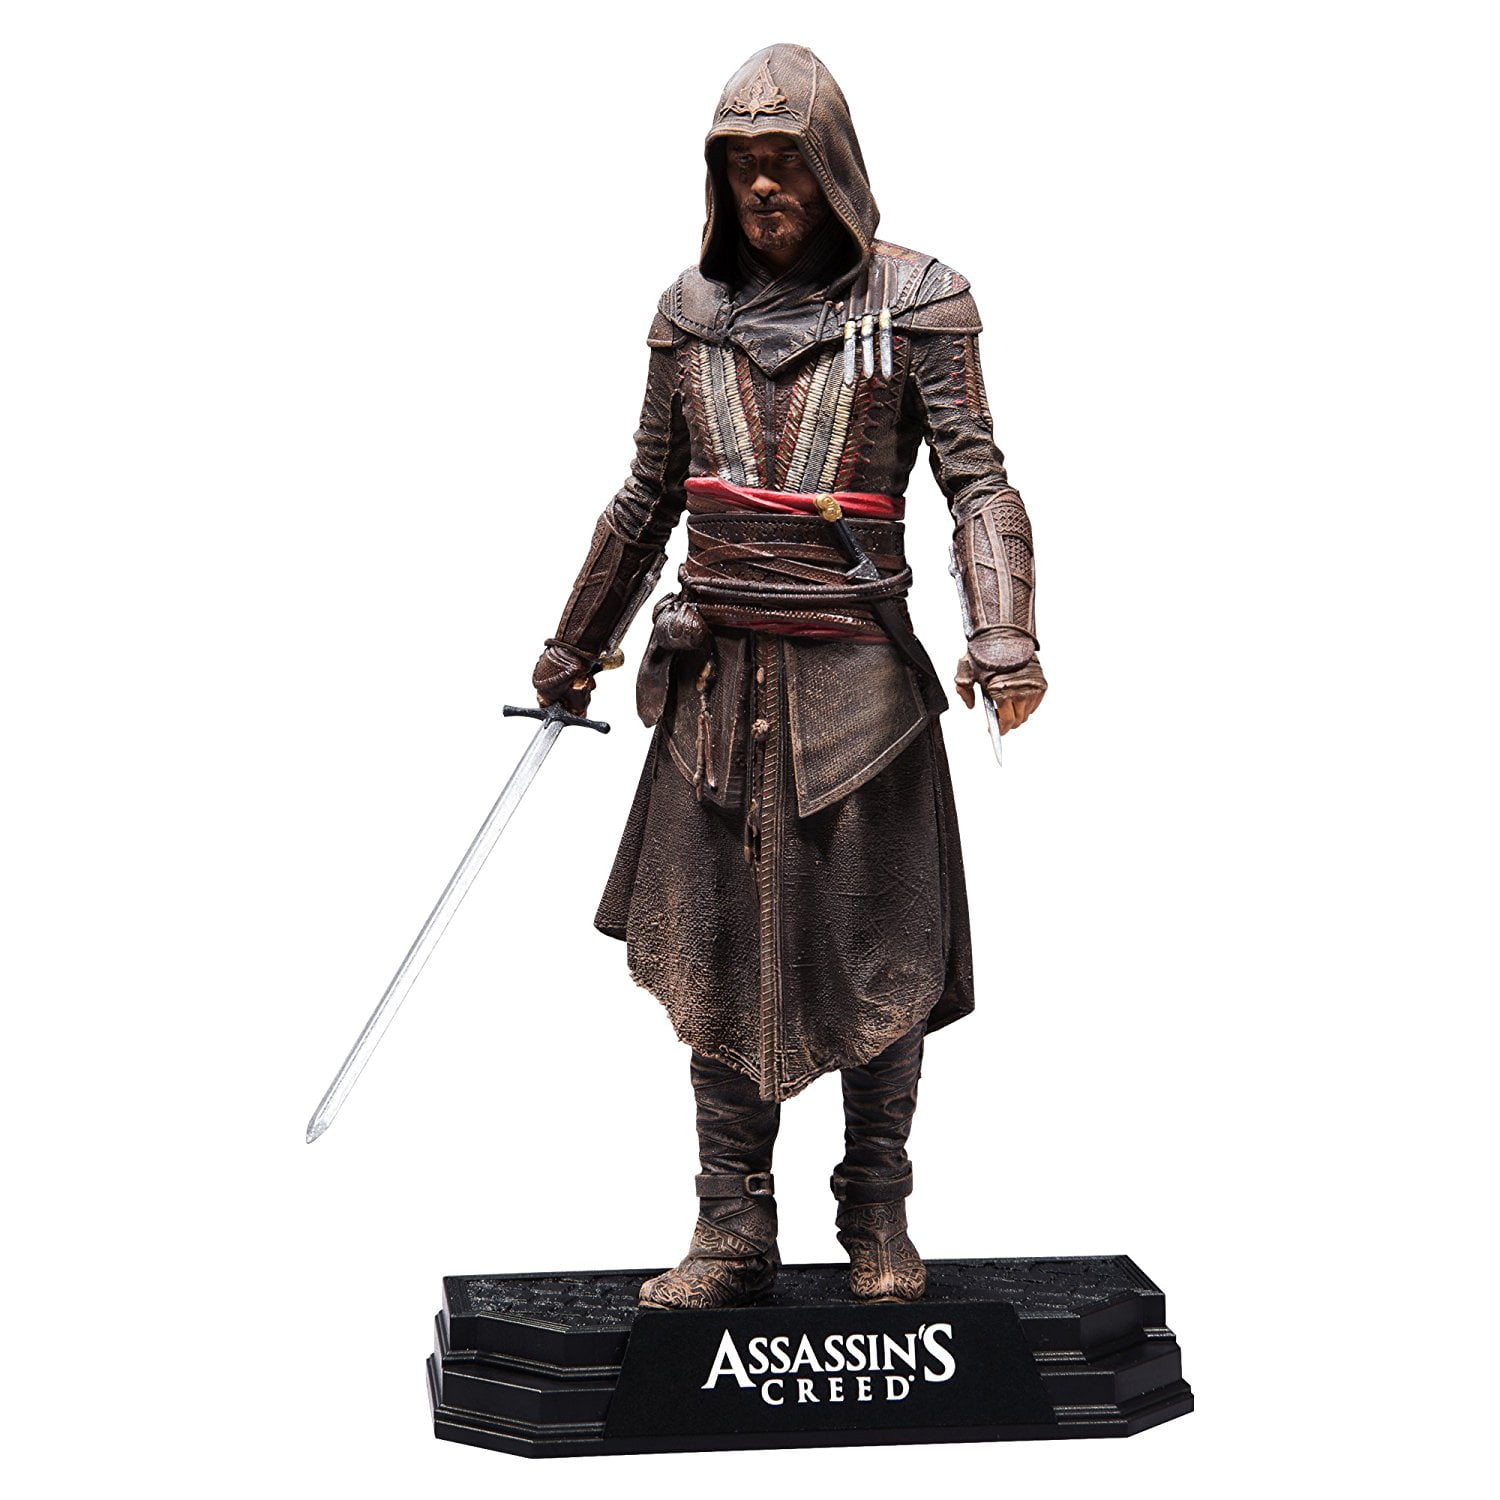 Toys Assassin S Creed Movie Aguilar 7 Collectible Action Figurefigure Comes Armed With An Assassin Sword And Extended Hidden Blade By Mcfarlane Walmart Com Walmart Com